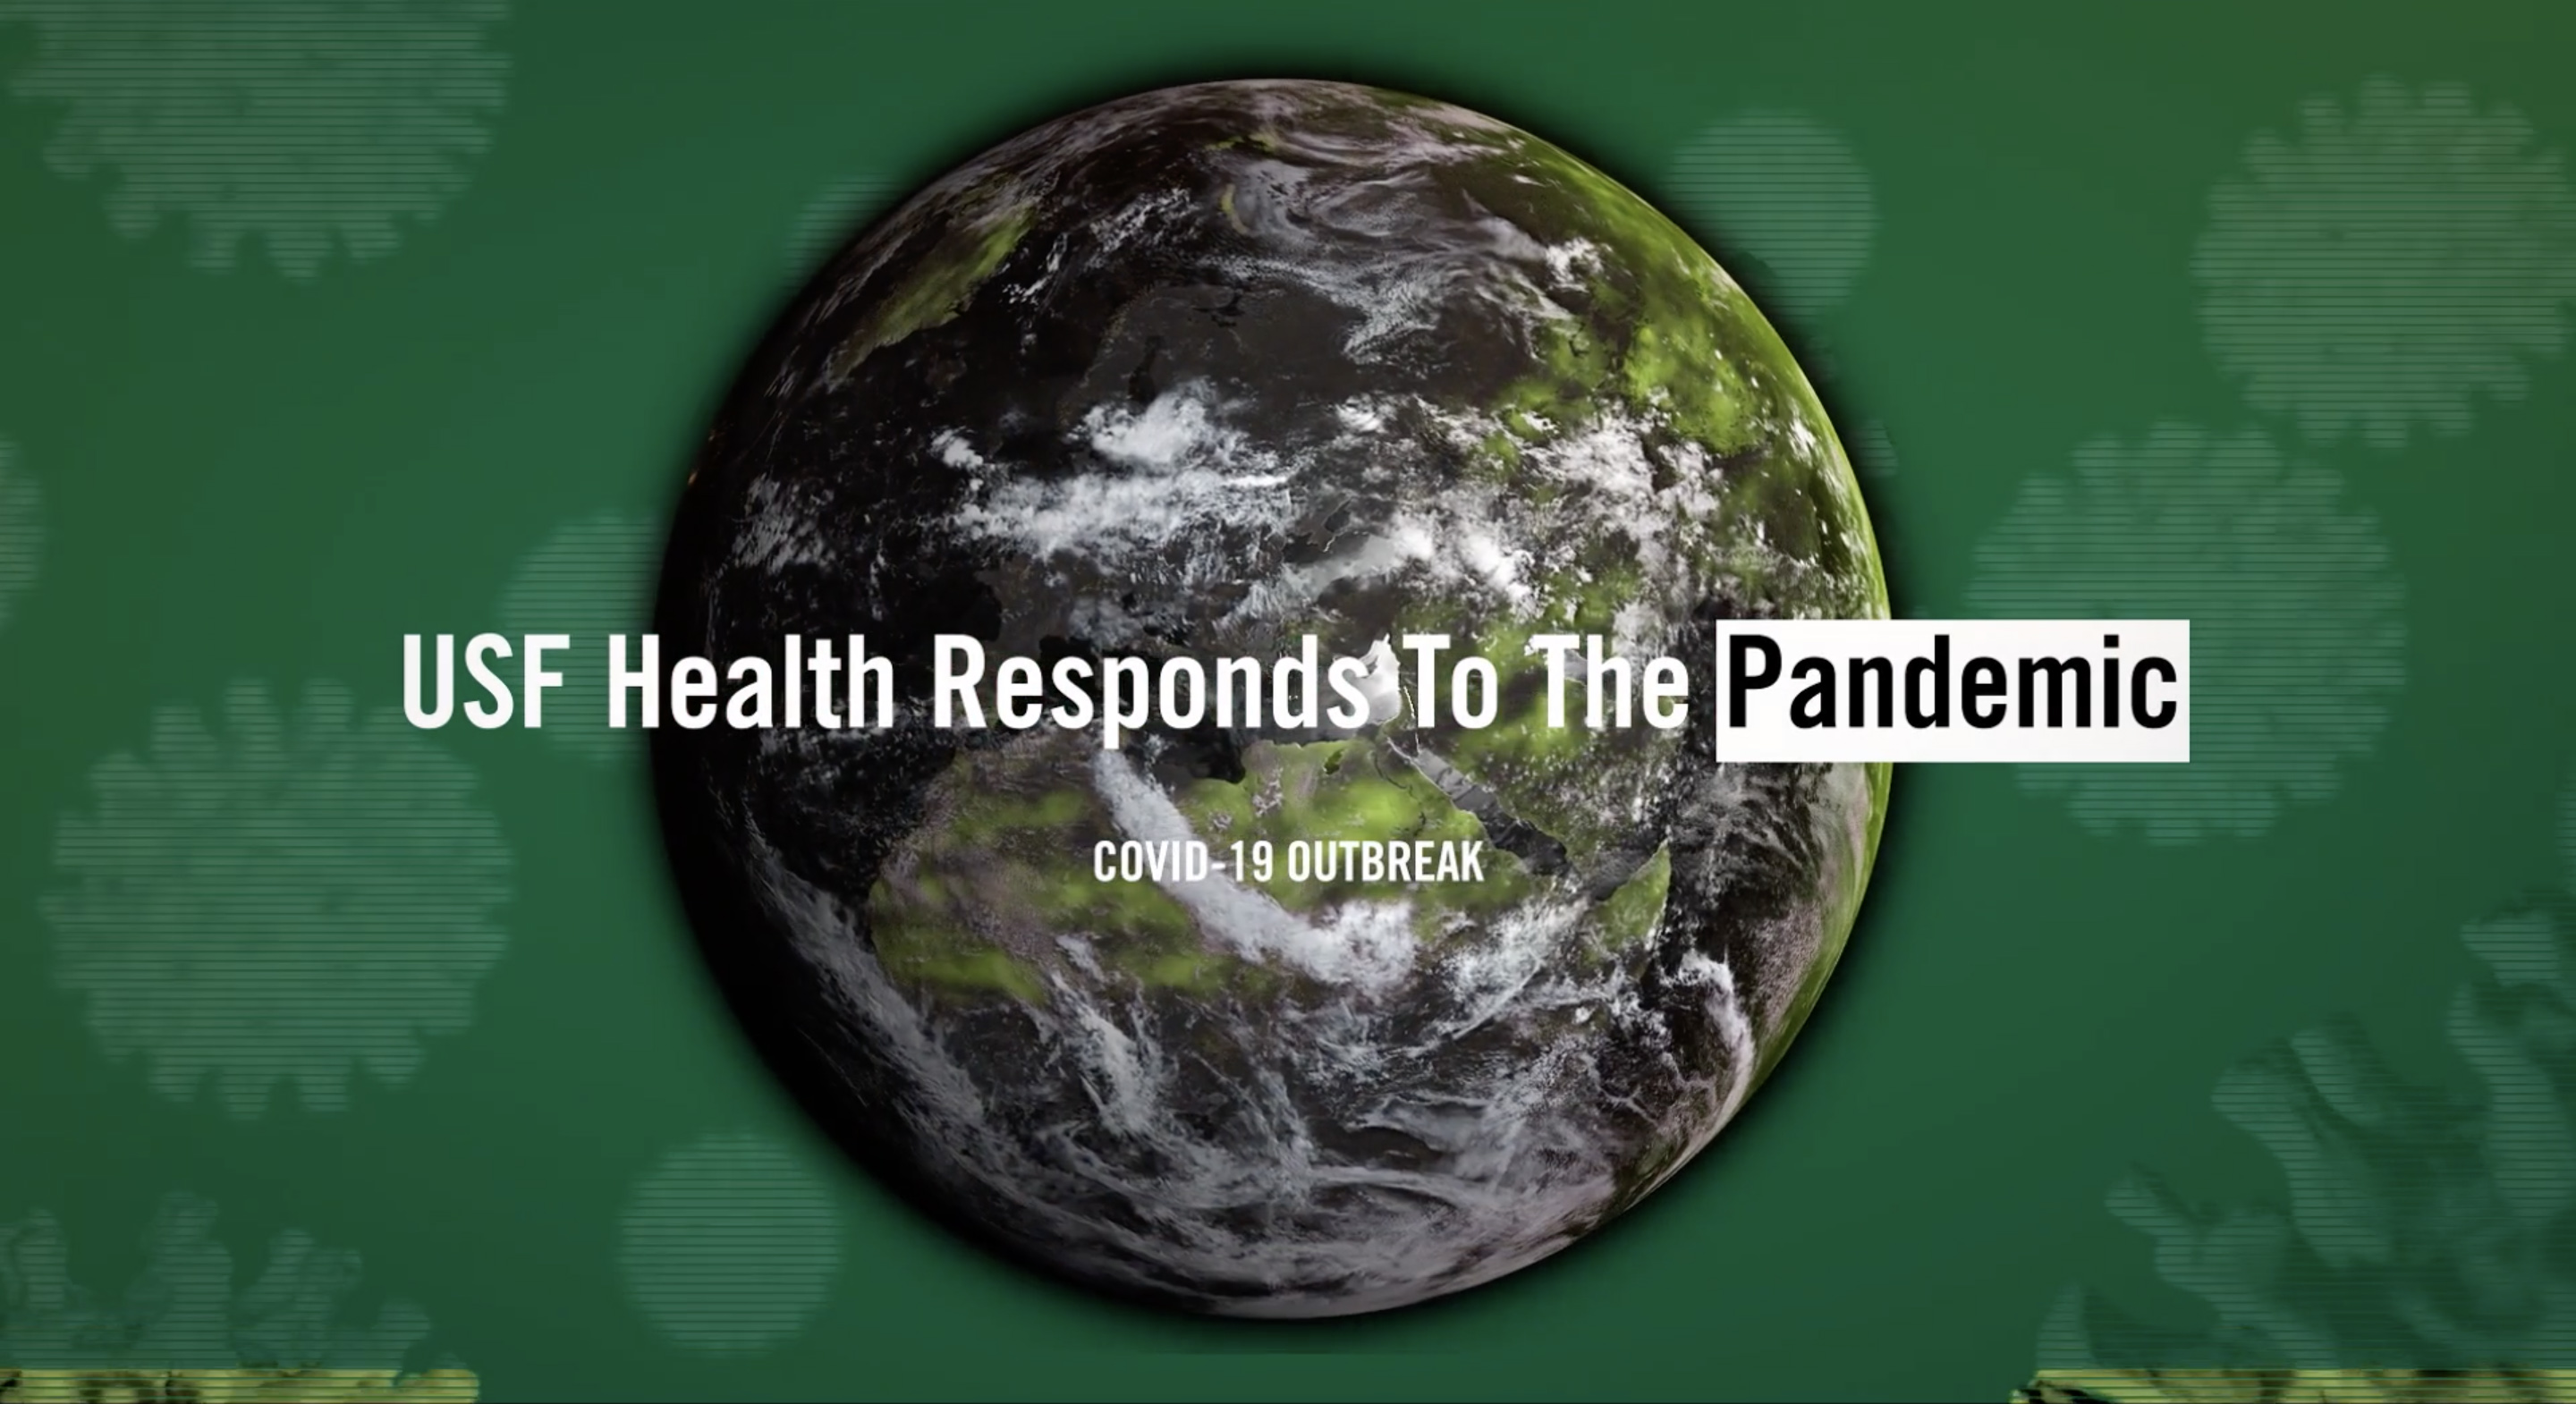 USF Health responds to the pandemic